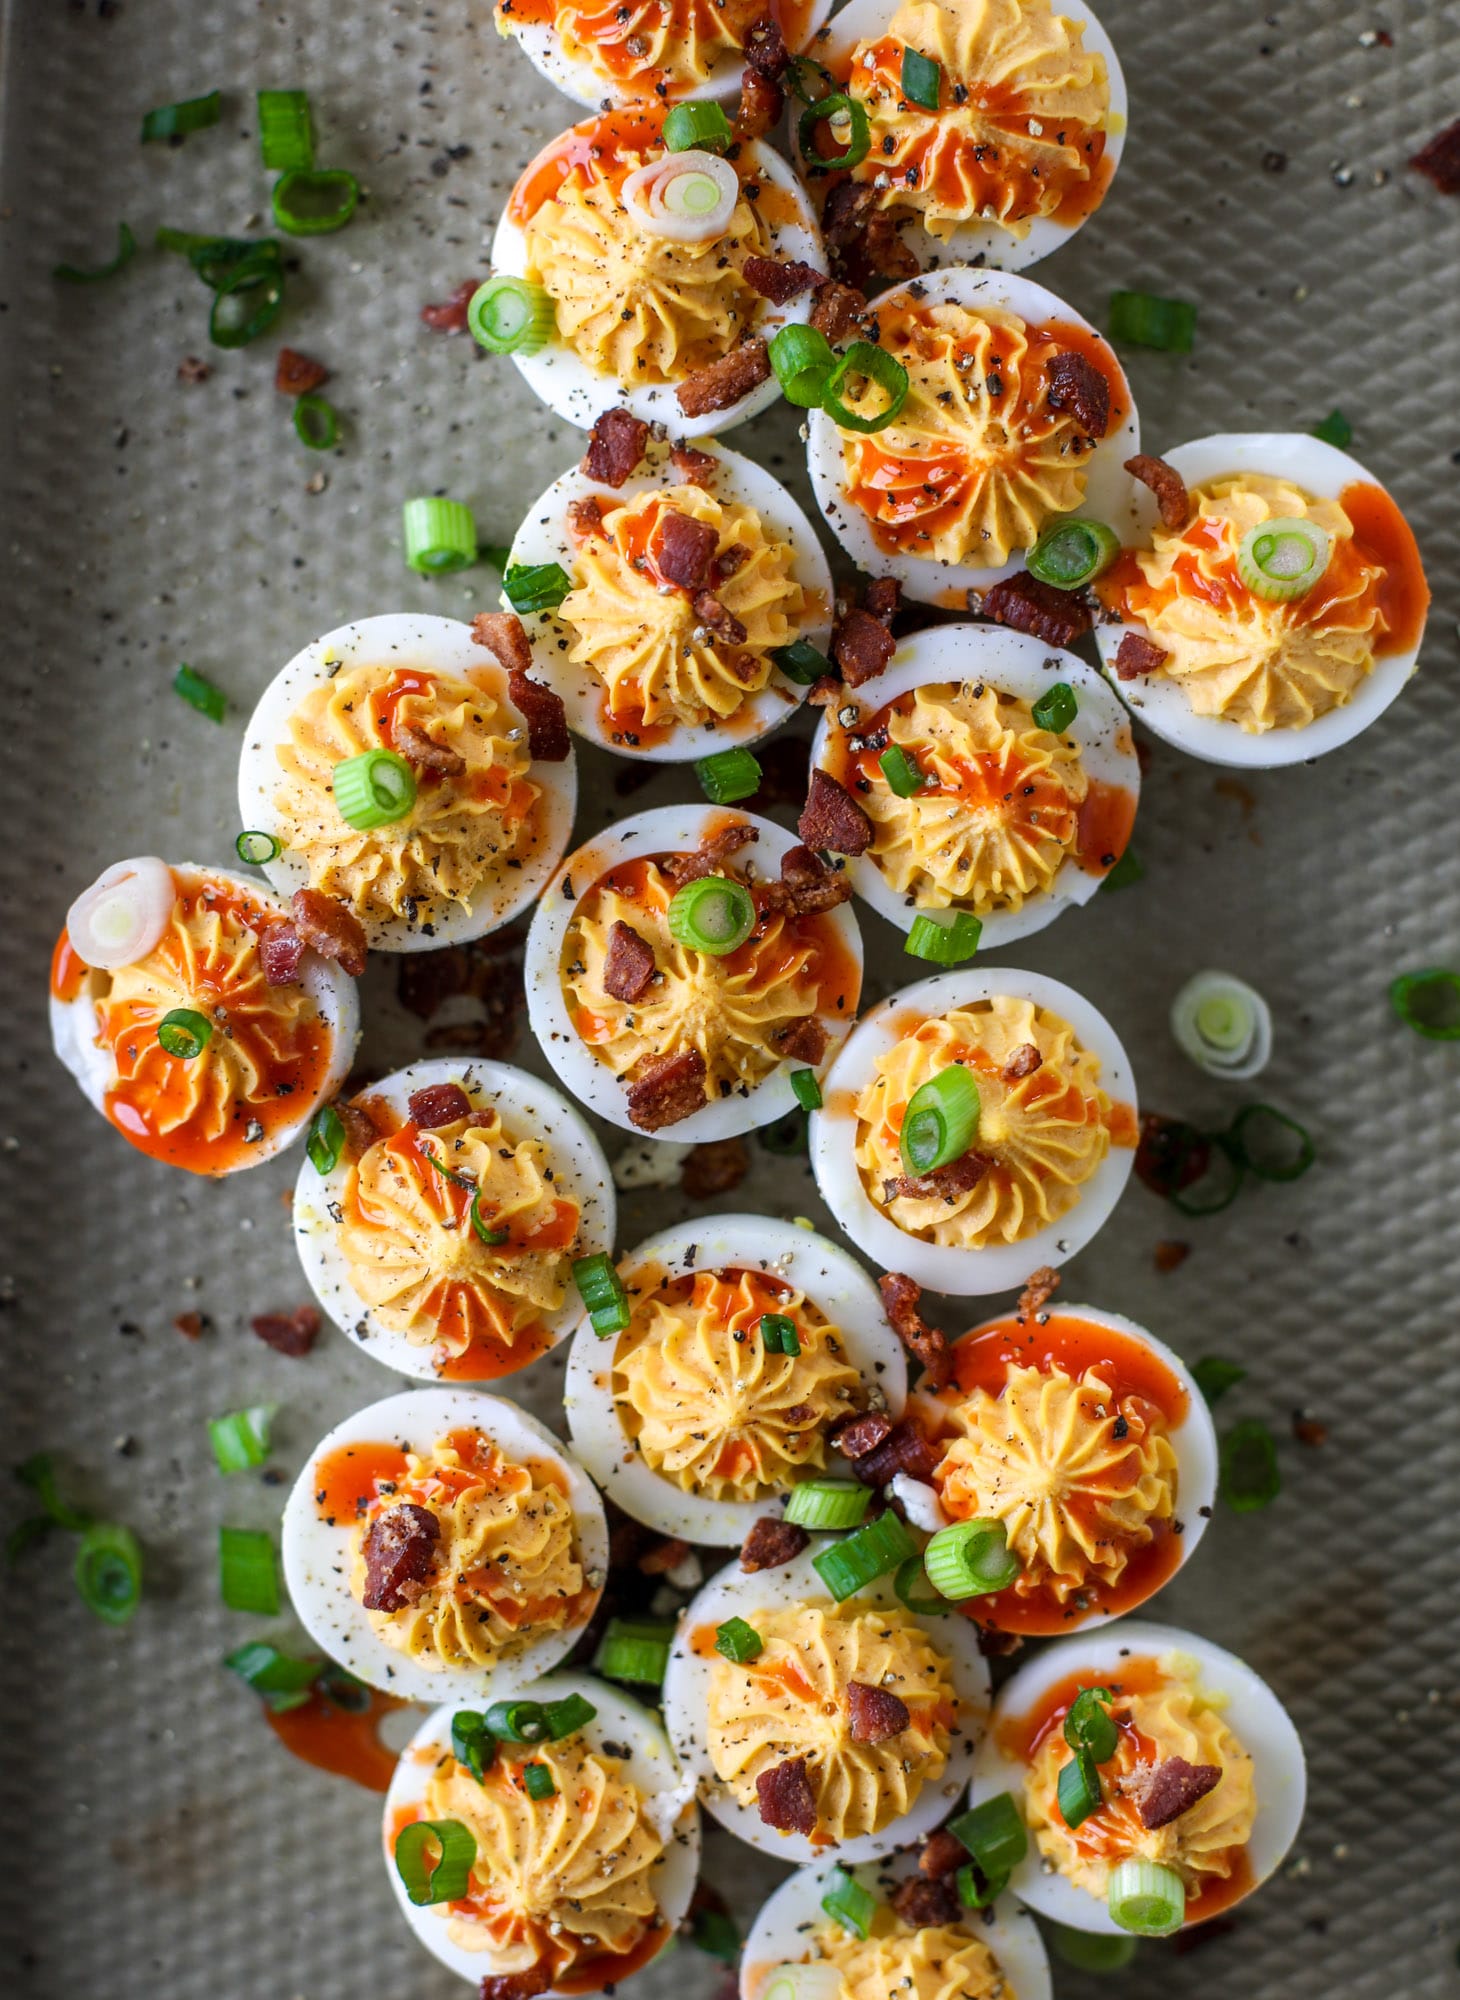 Buffalo deviled eggs are kicked-up deviled eggs! Made with goat cheese filling and served with buffalo wing sauce, crispy bacon and sliced scallions. I howsweeteats.com #deviledeggs #buffalo